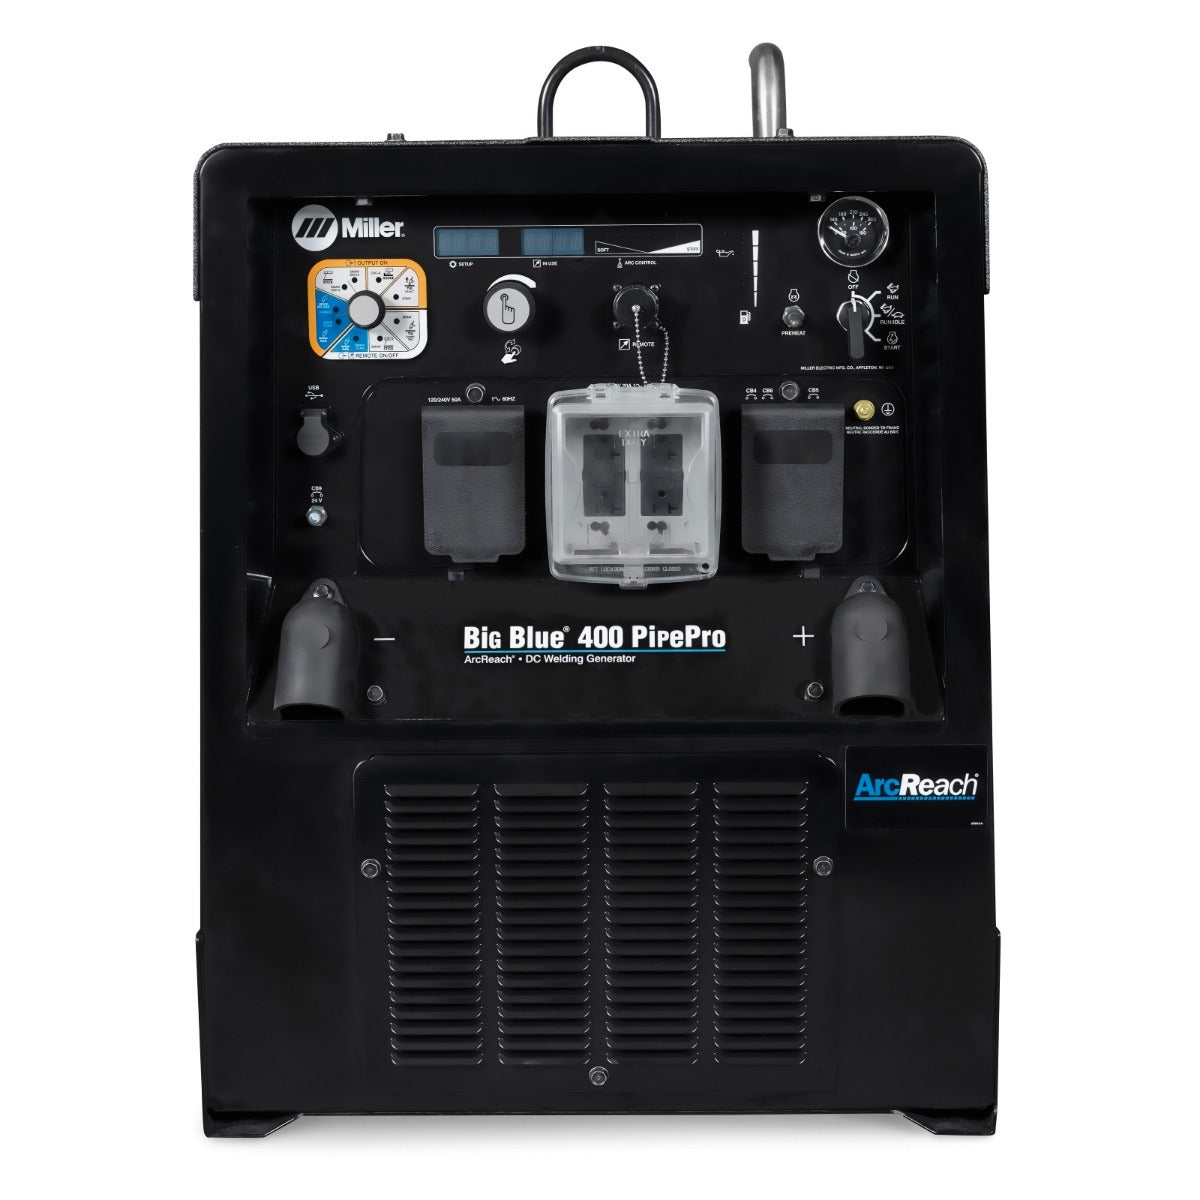 Miller Big Blue 400 PipePro Mitsubishi Welder/Generator with Stainless Steel Panels (907703)